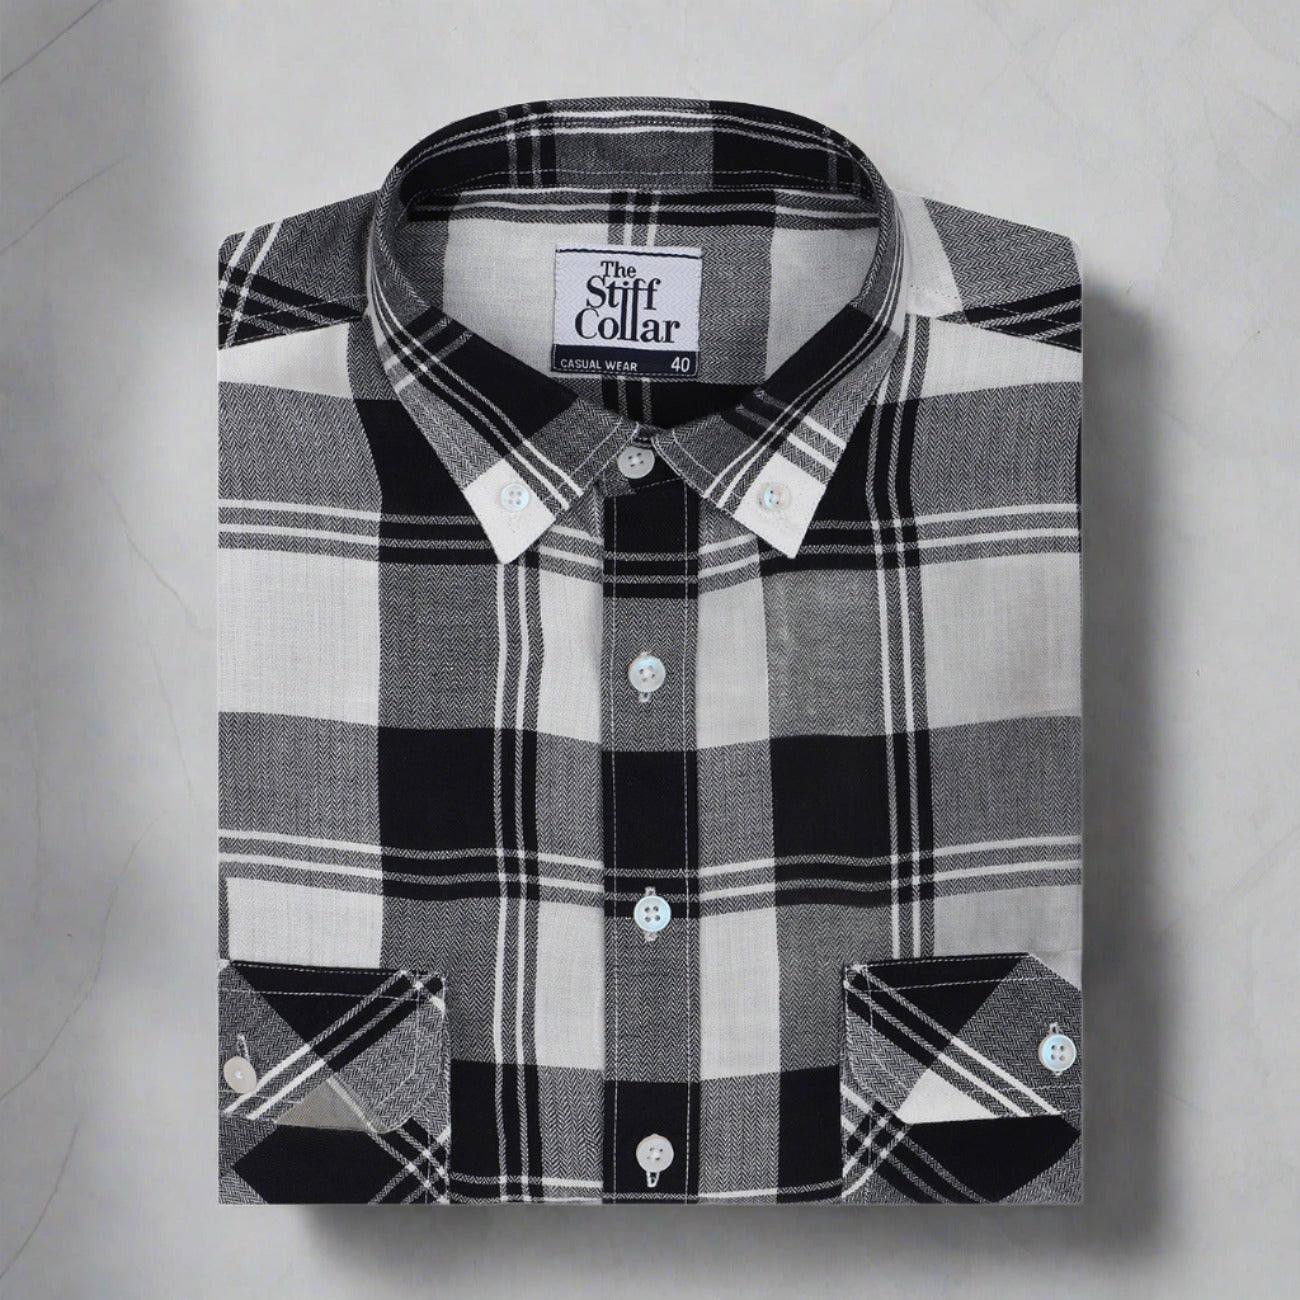 white and black check cotton shirt for men